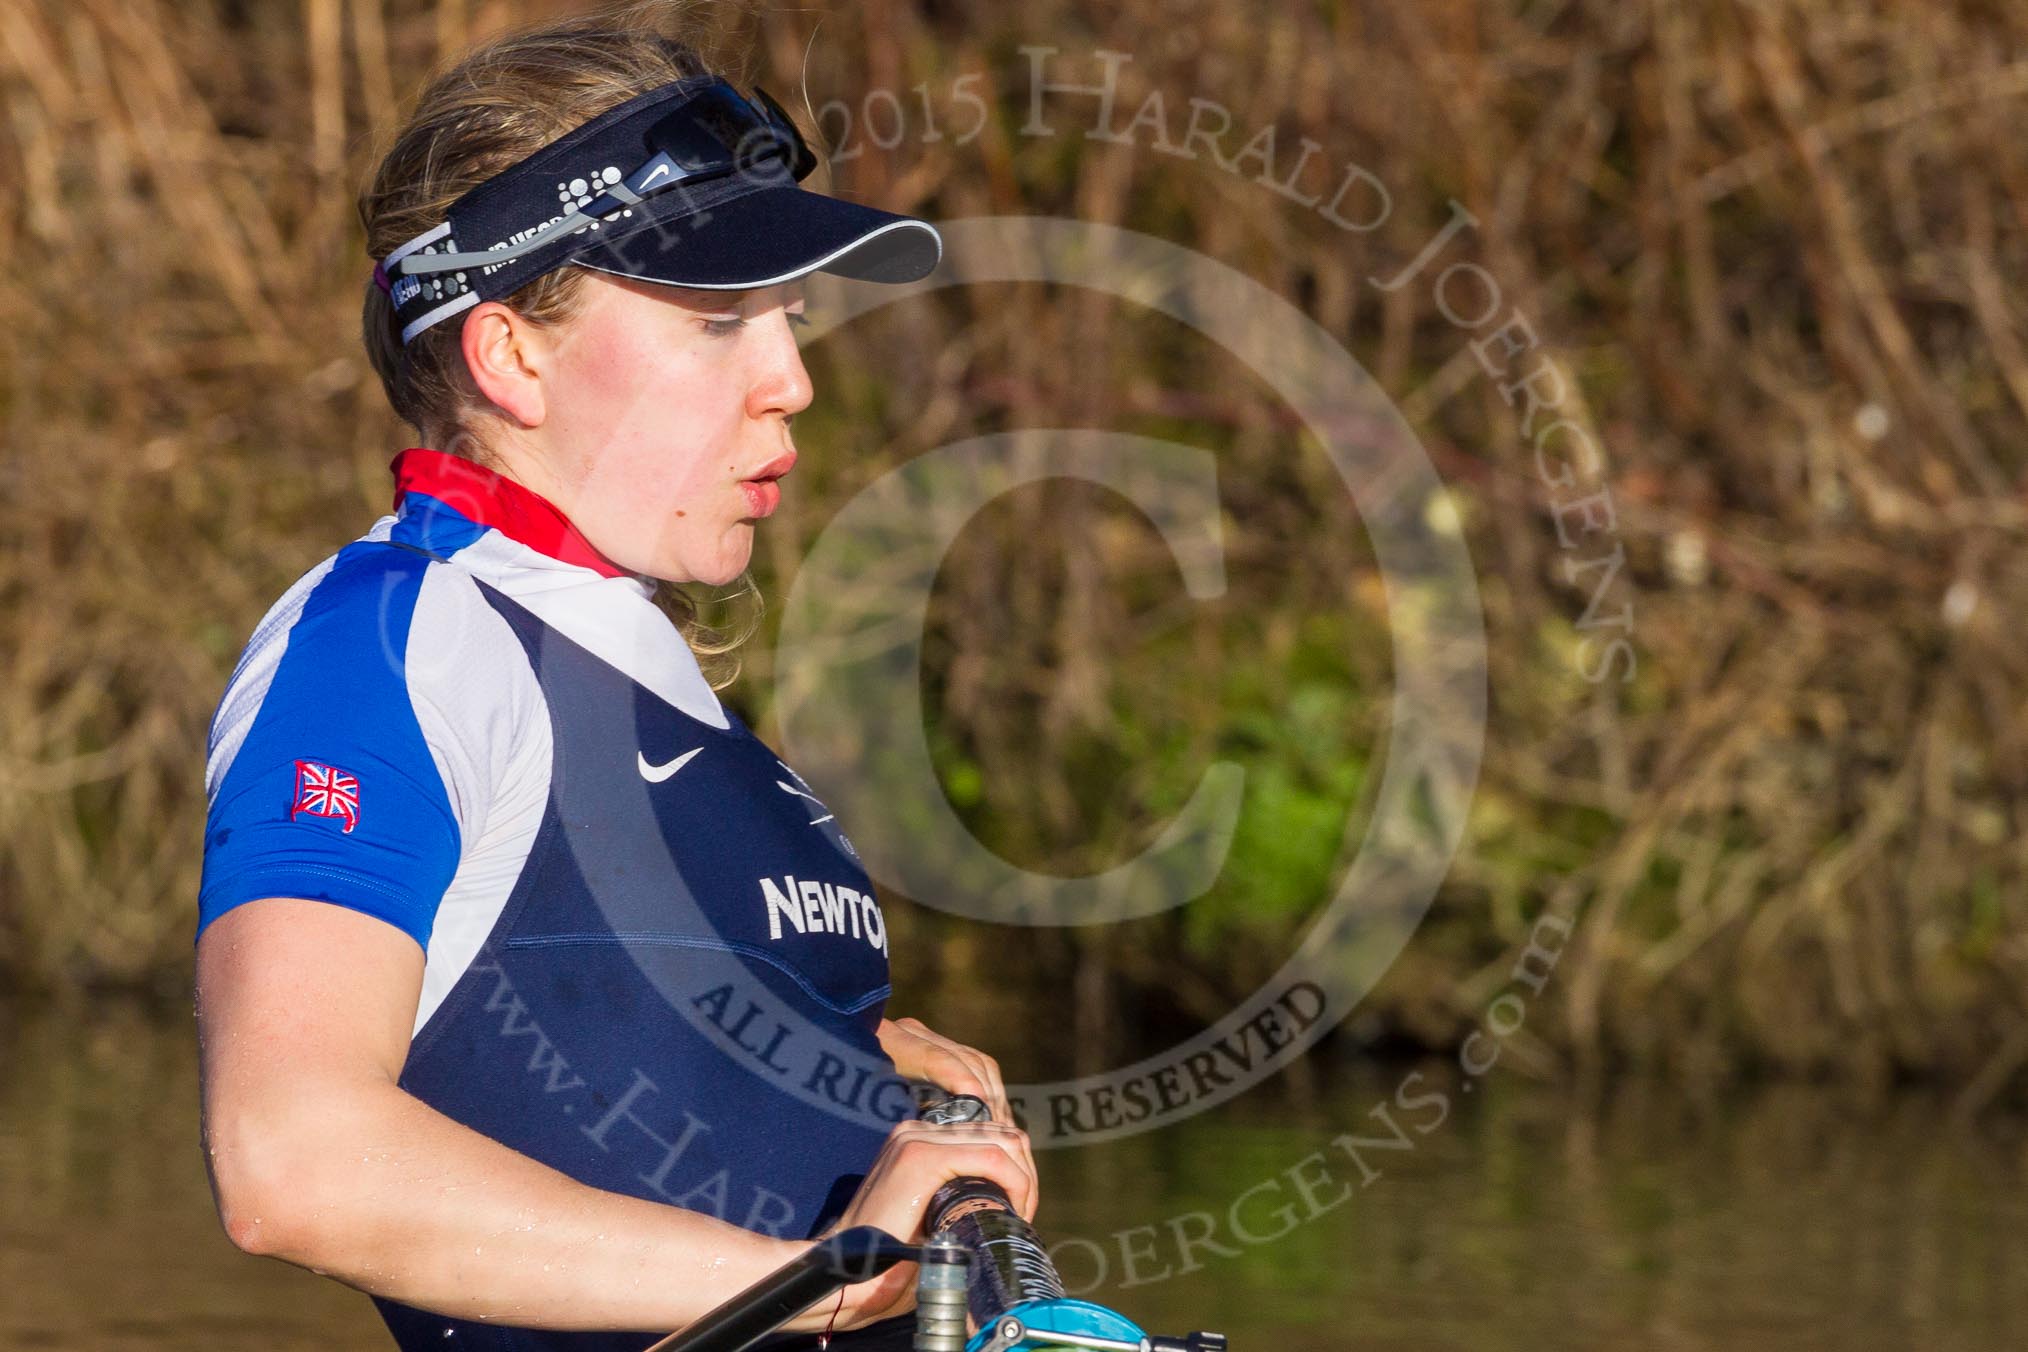 The Boat Race season 2015: OUWBC training Wallingford.

Wallingford,

United Kingdom,
on 04 March 2015 at 16:08, image #171